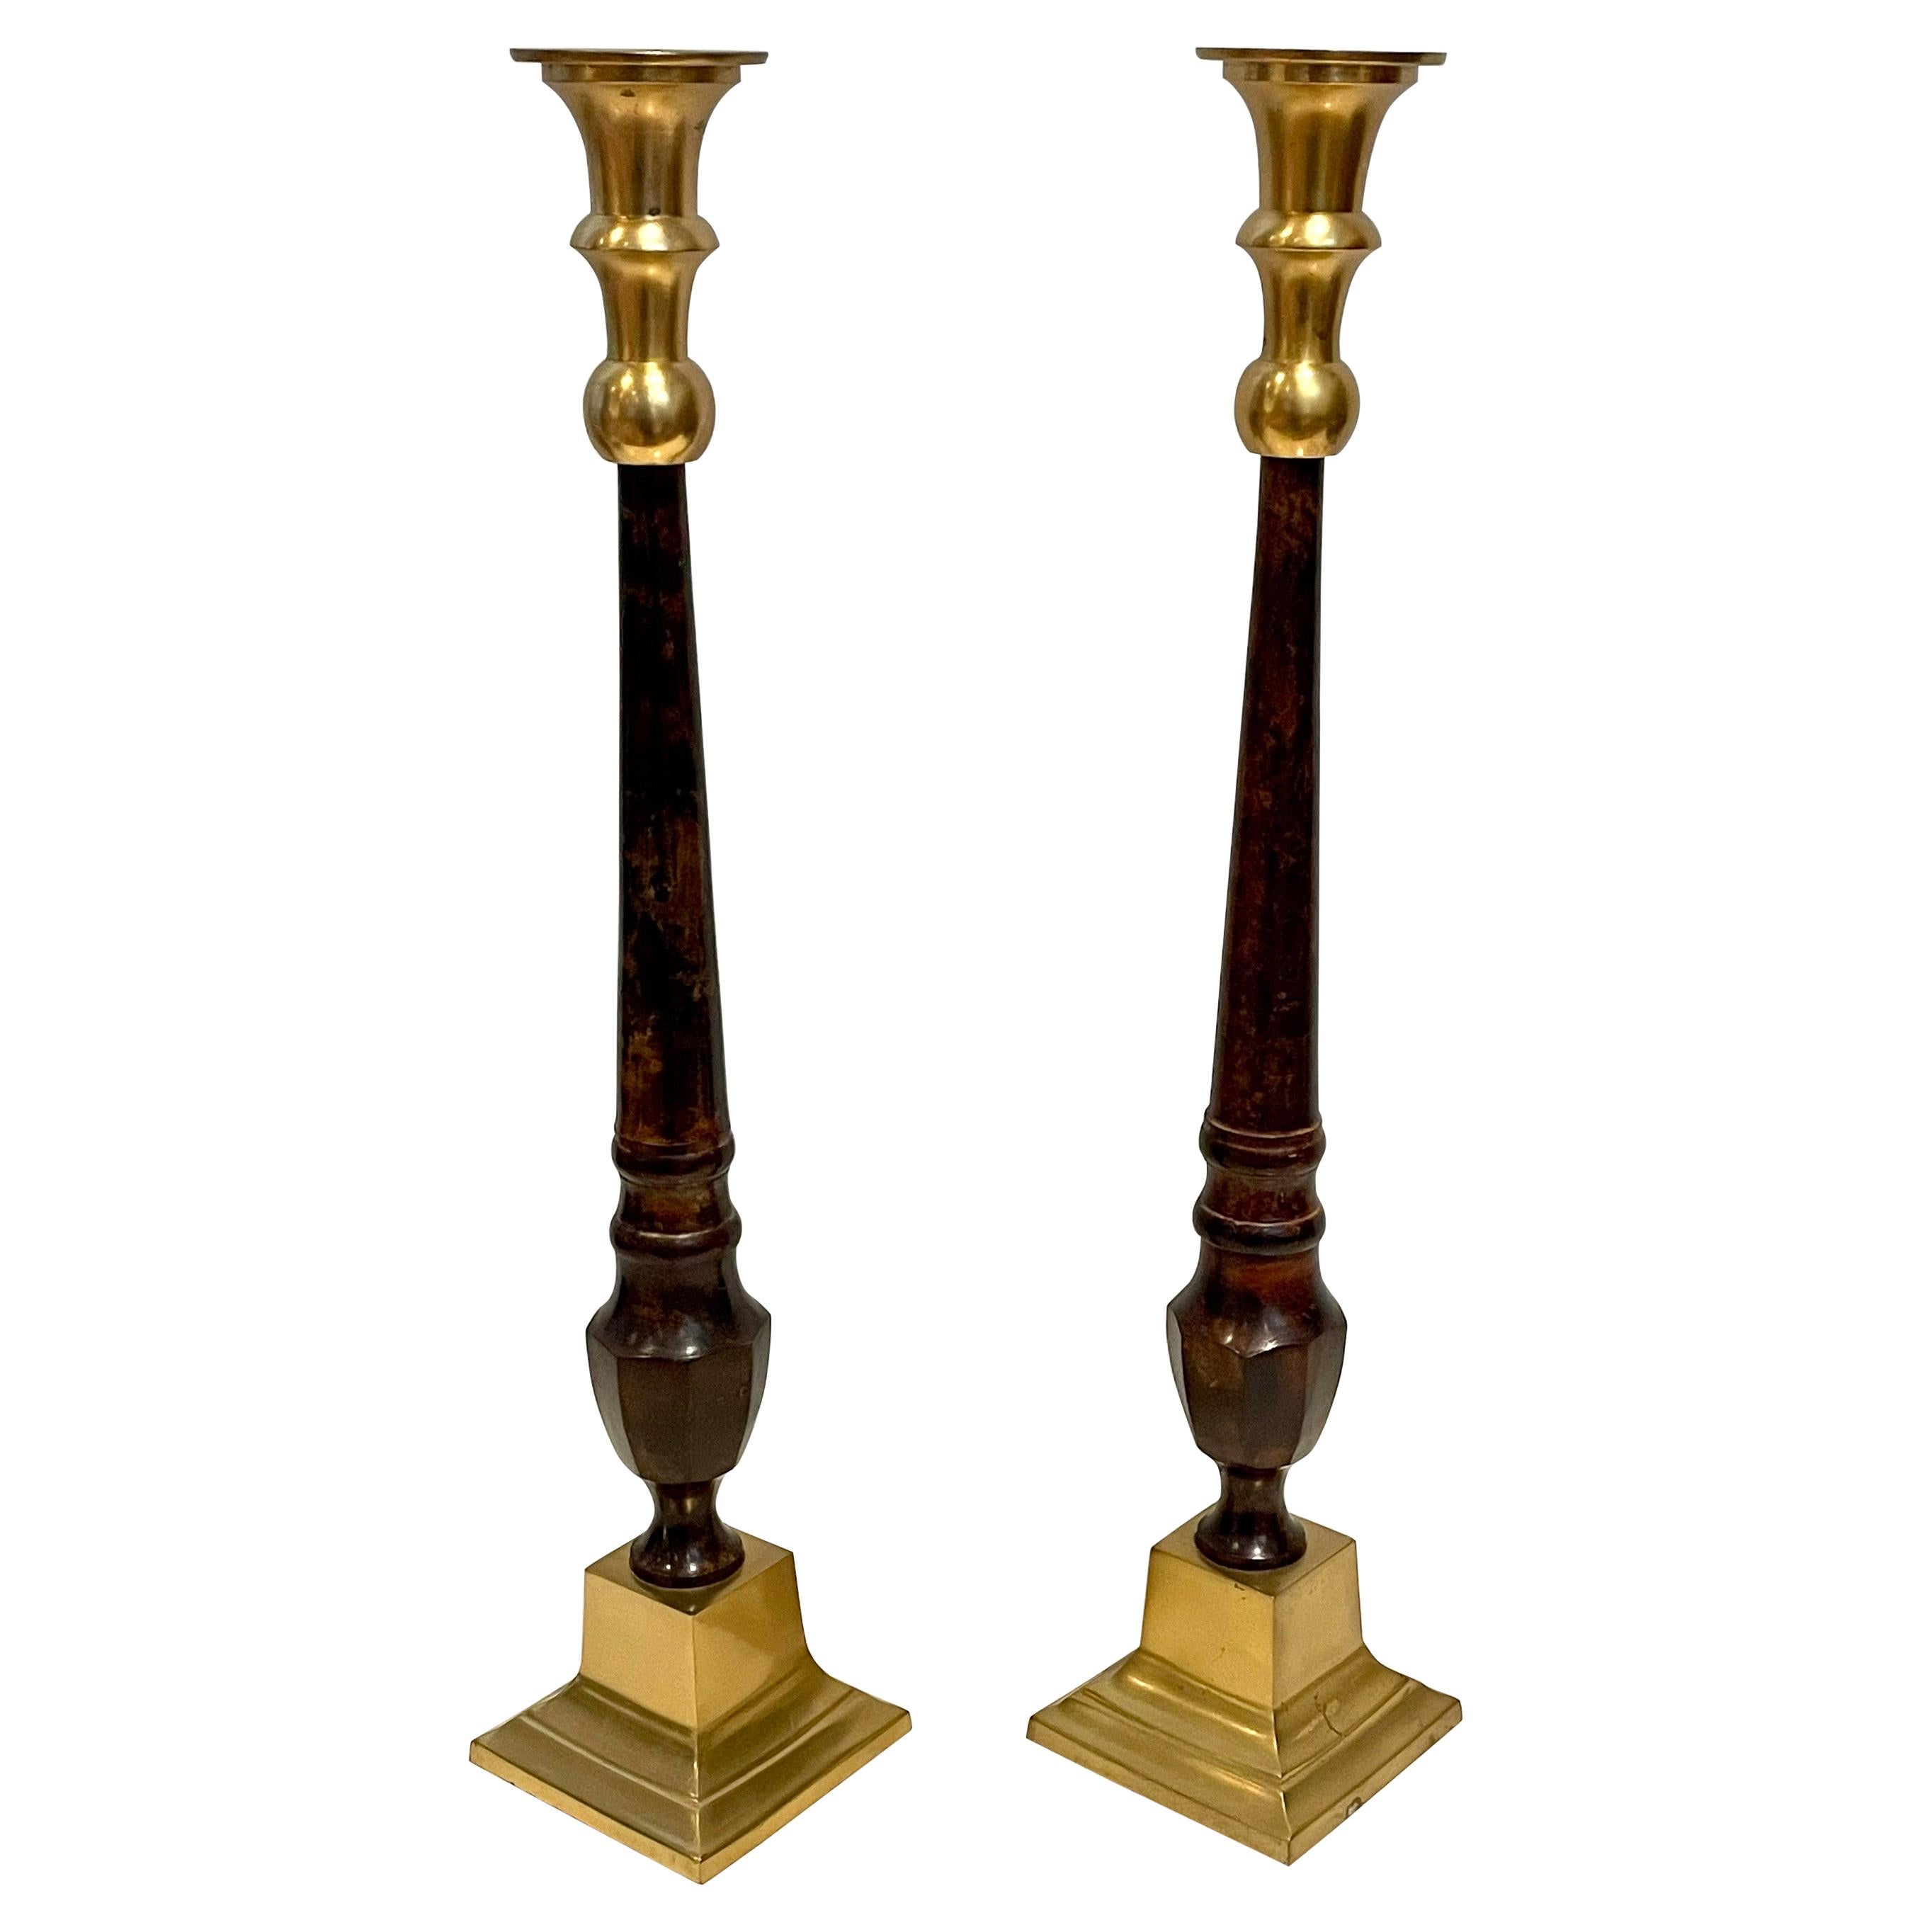 Tall Pair of Hollywood Regency Brass & Faux Marble Candle Holders